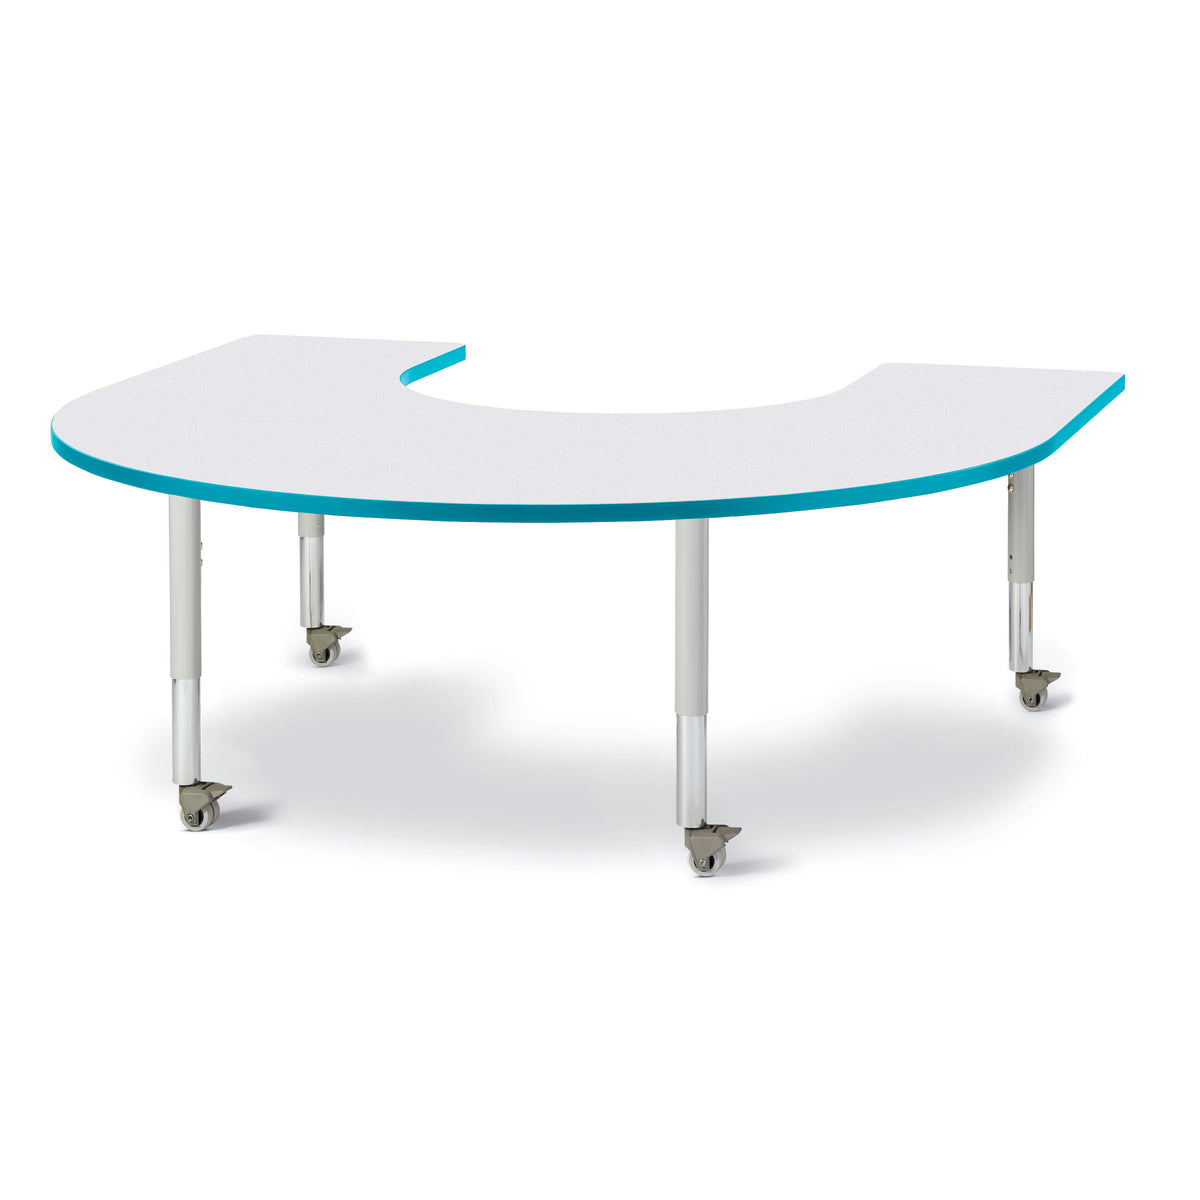 6445JCM005, Berries Horseshoe Activity Table - 66" X 60", Mobile - Freckled Gray/Teal/Gray